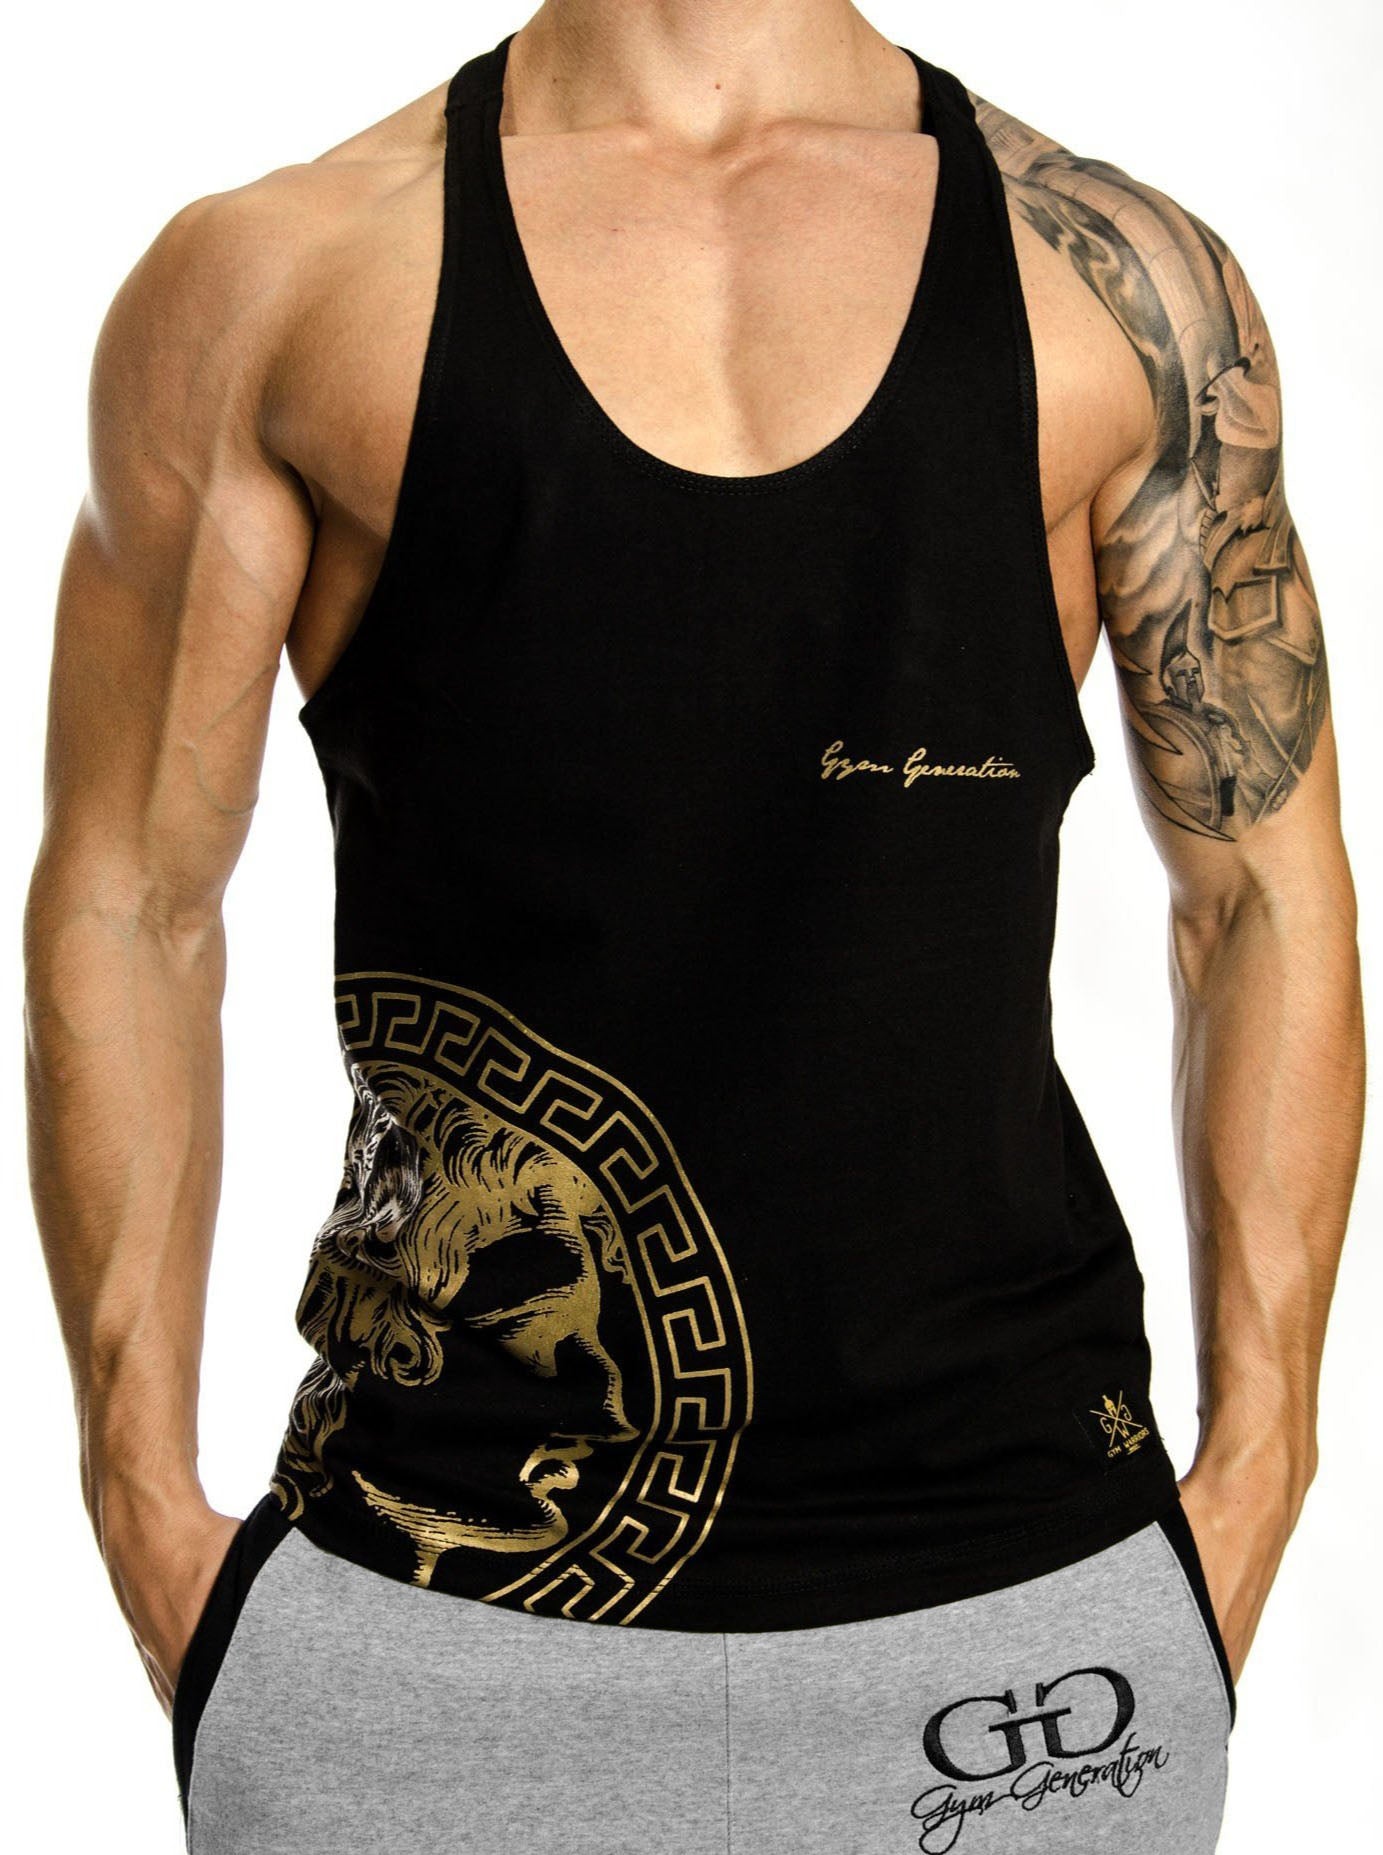 Gym Generation Stringers - Alexander the Great